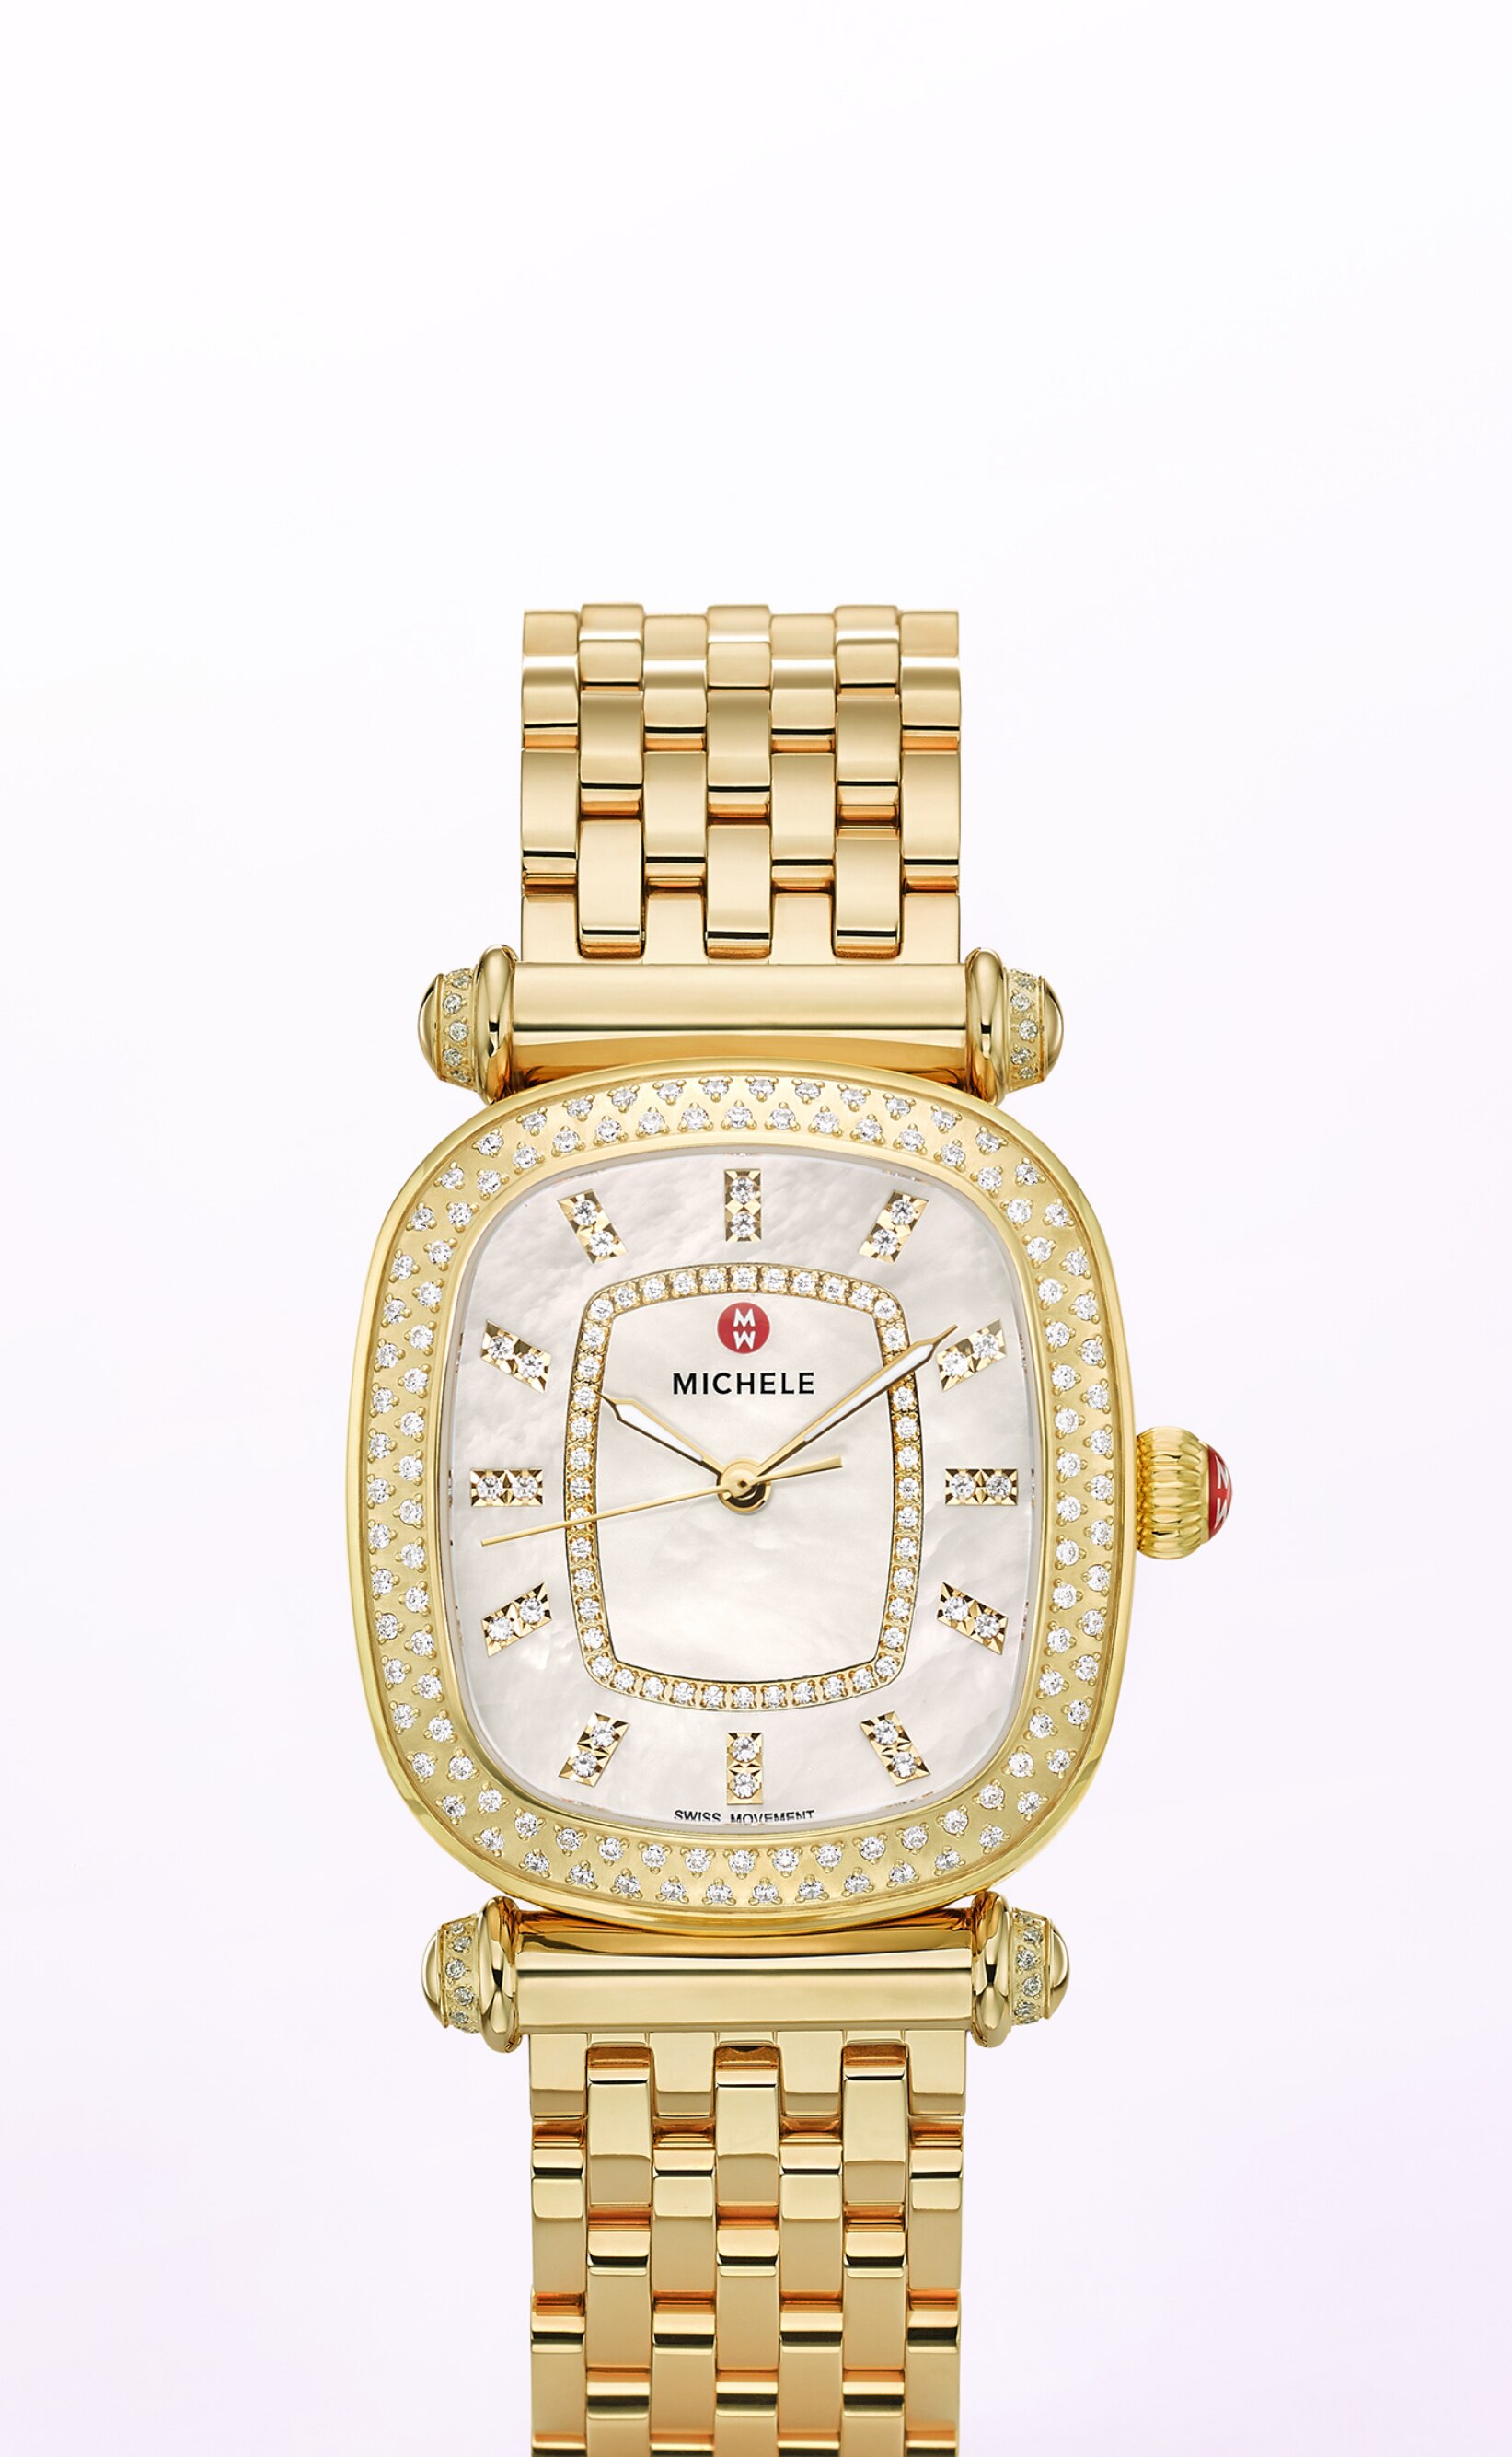 18K gold-tone Caber Isle watch featuring cushion-shaped case, diamond-covered bezel and t-bar lugs.